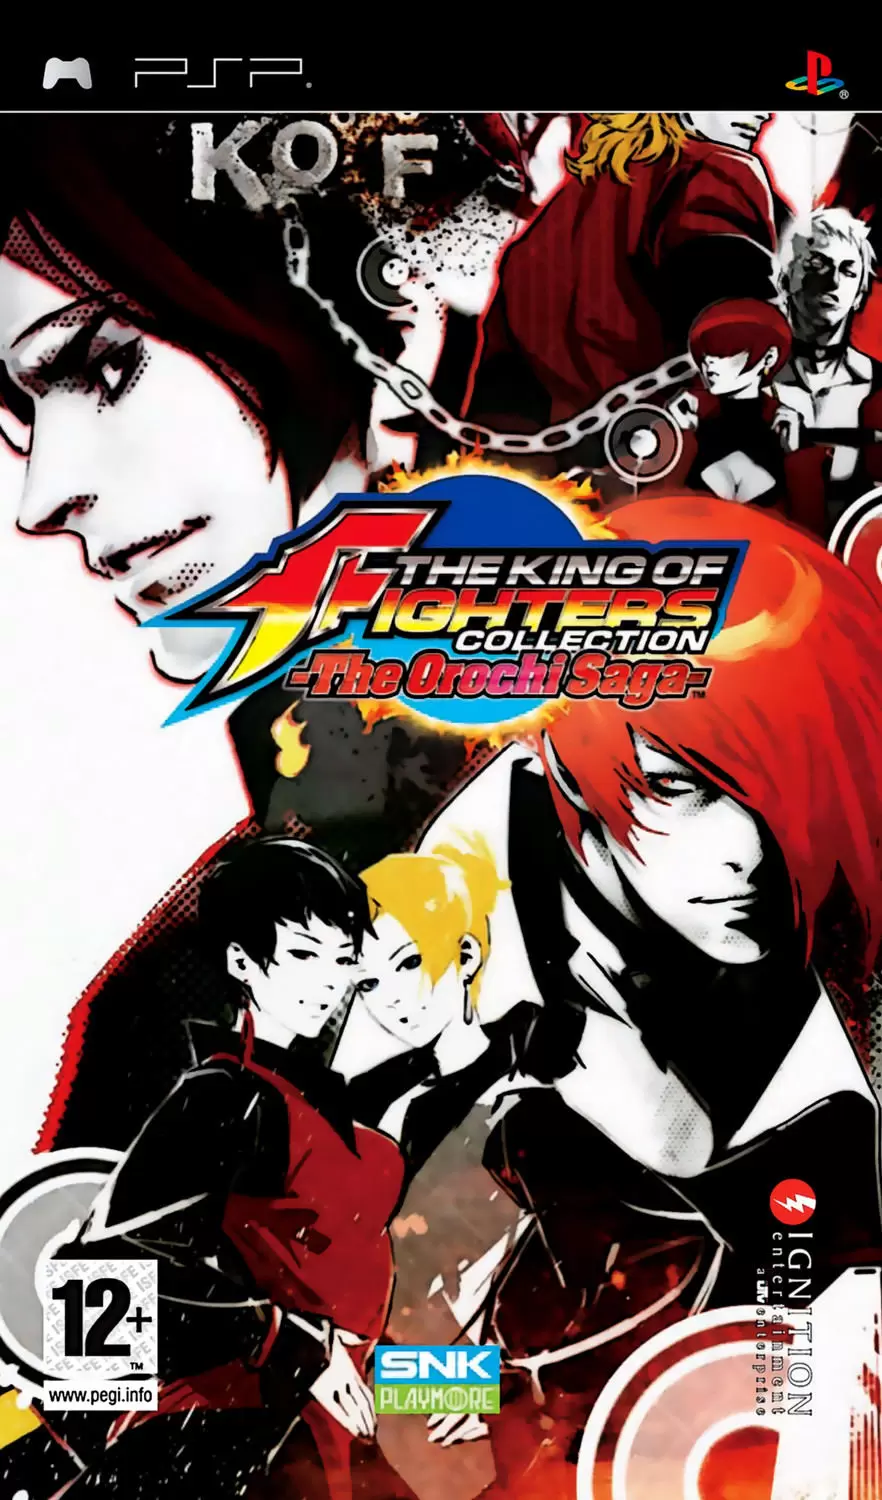 The King of Fighters Collection: The Orochi Saga (Video Game 2008